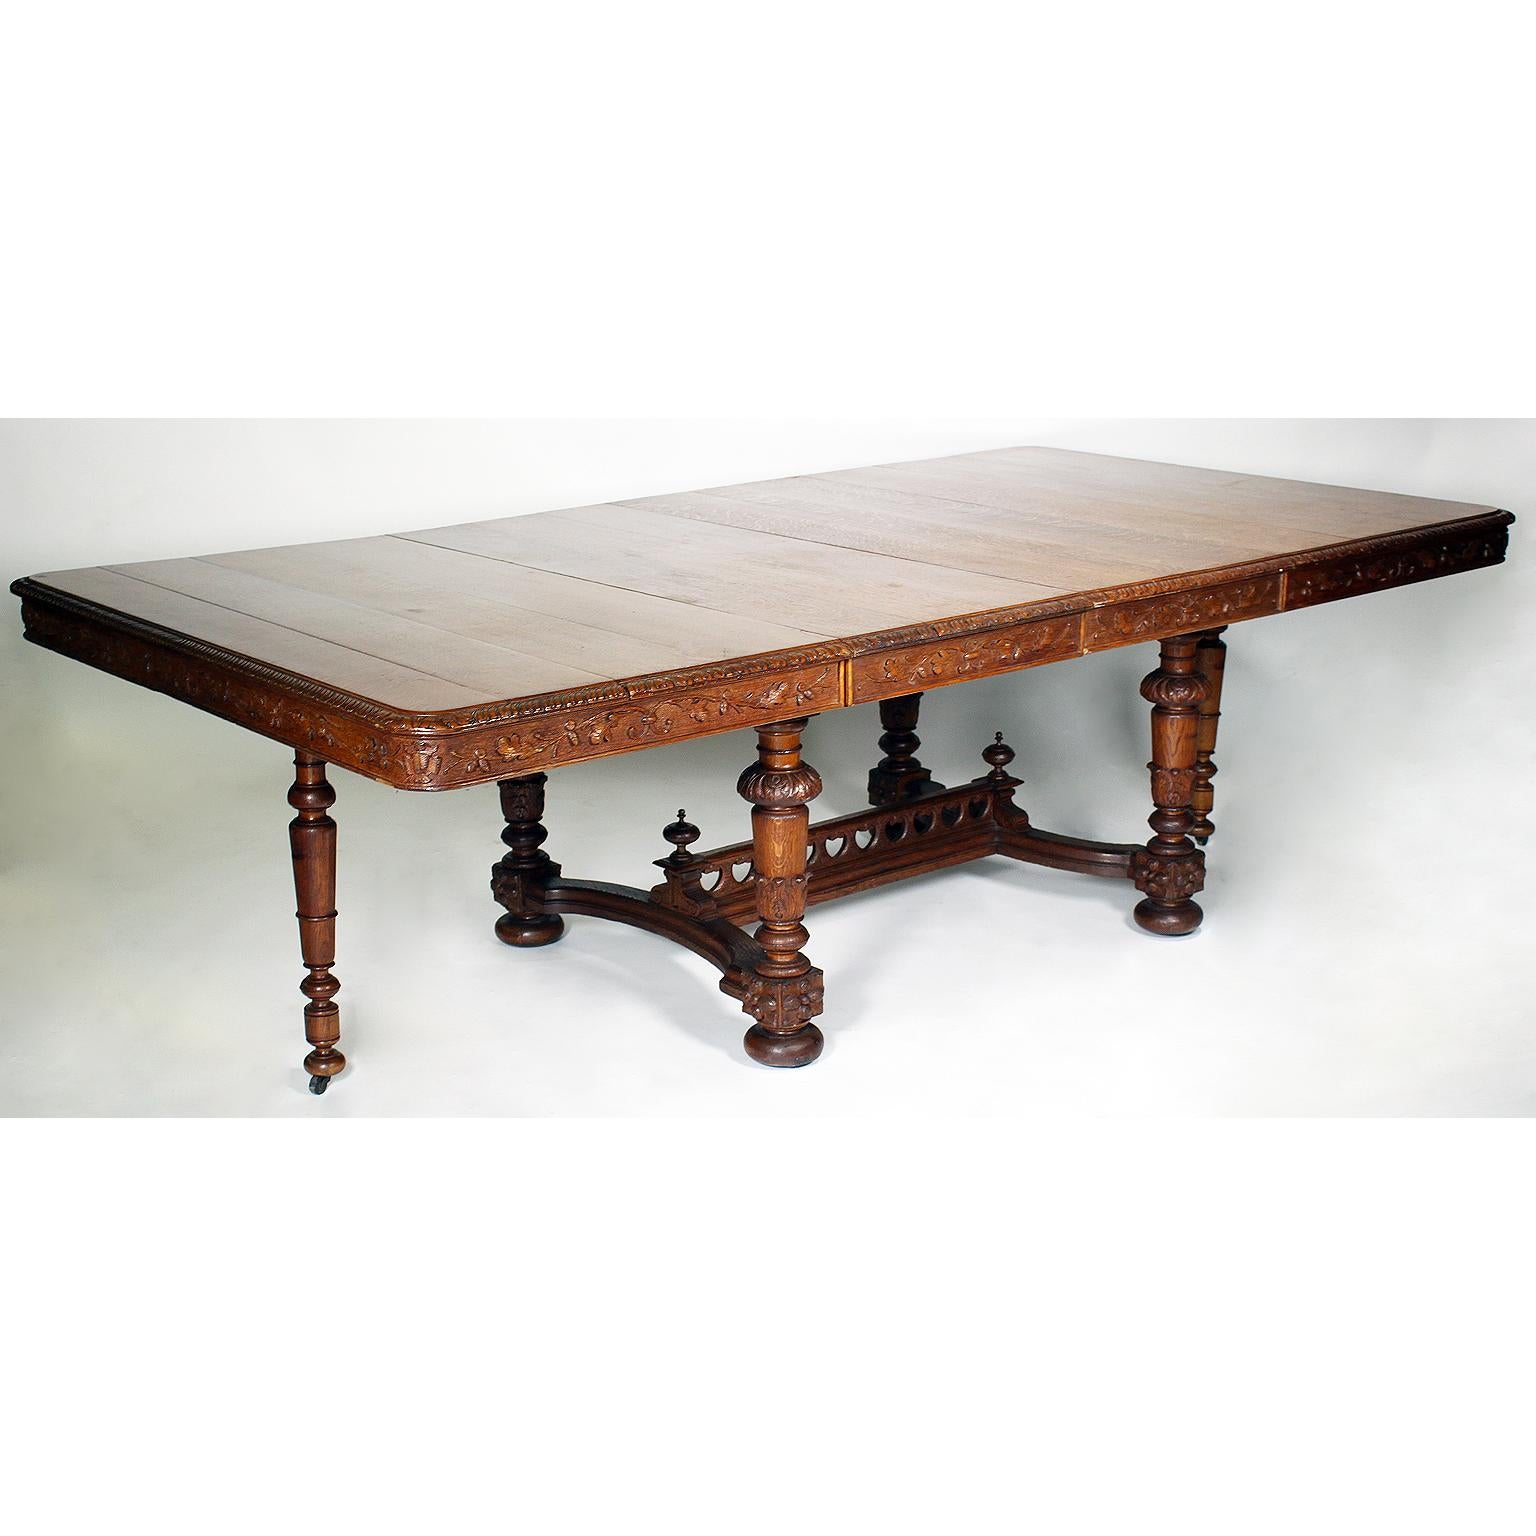 A Fine and rare Italian 19th Century Baroque Renaissance revival style carved oak thirteen-piece dining suite. Comprising of a large rectangular center-pedestal dining table with four extensions and drop-support-legs at the end, the apron with